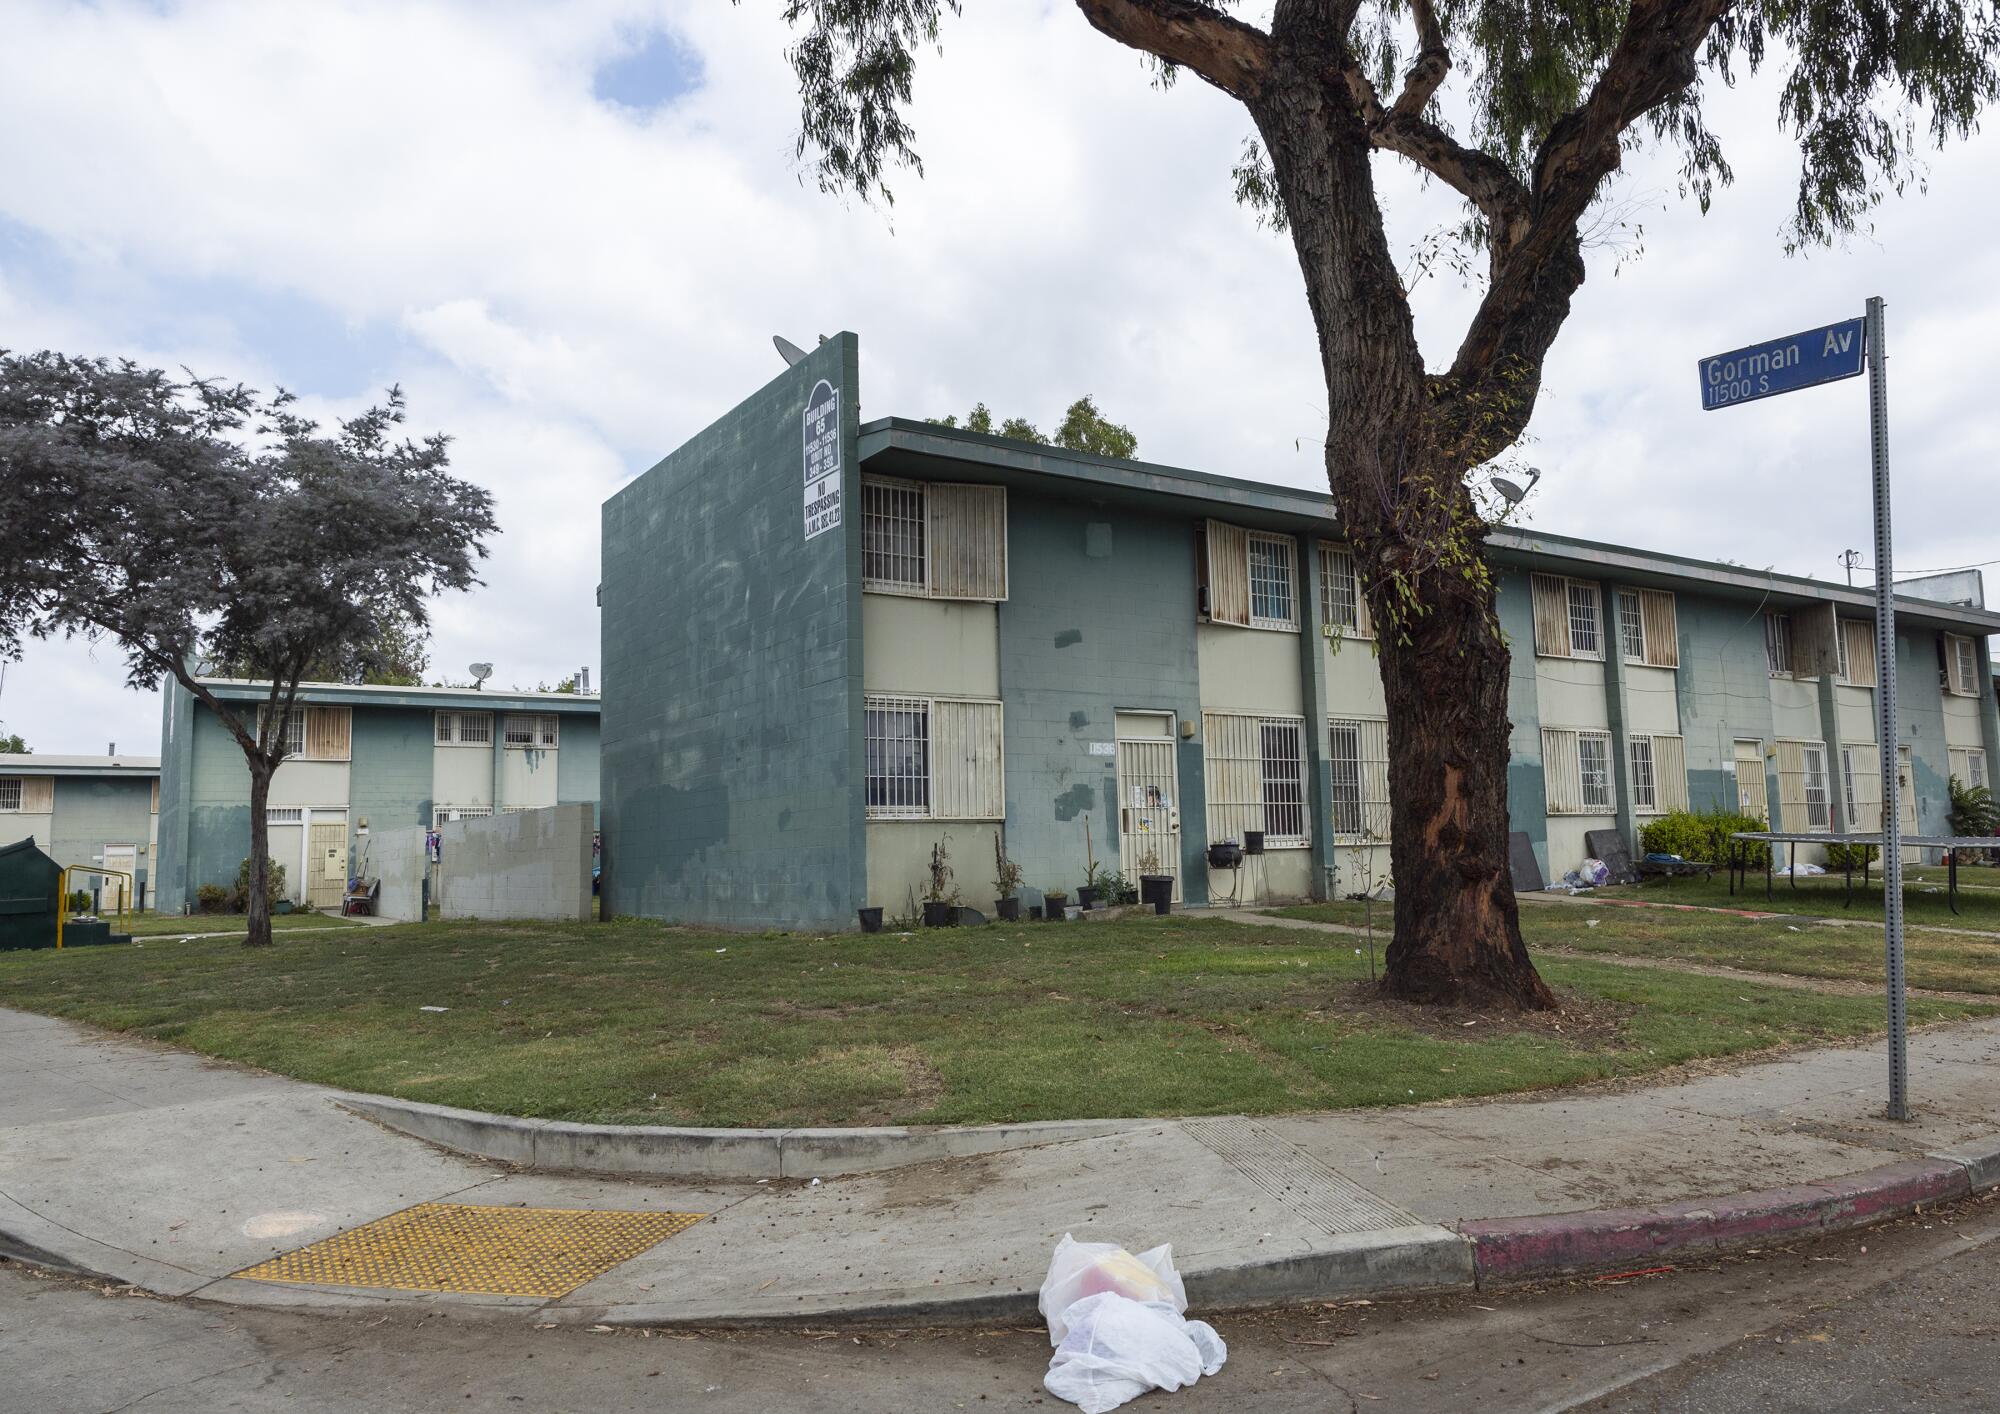 The Imperial Courts public housing development in Watts, pictured on Sept. 20, 2023.